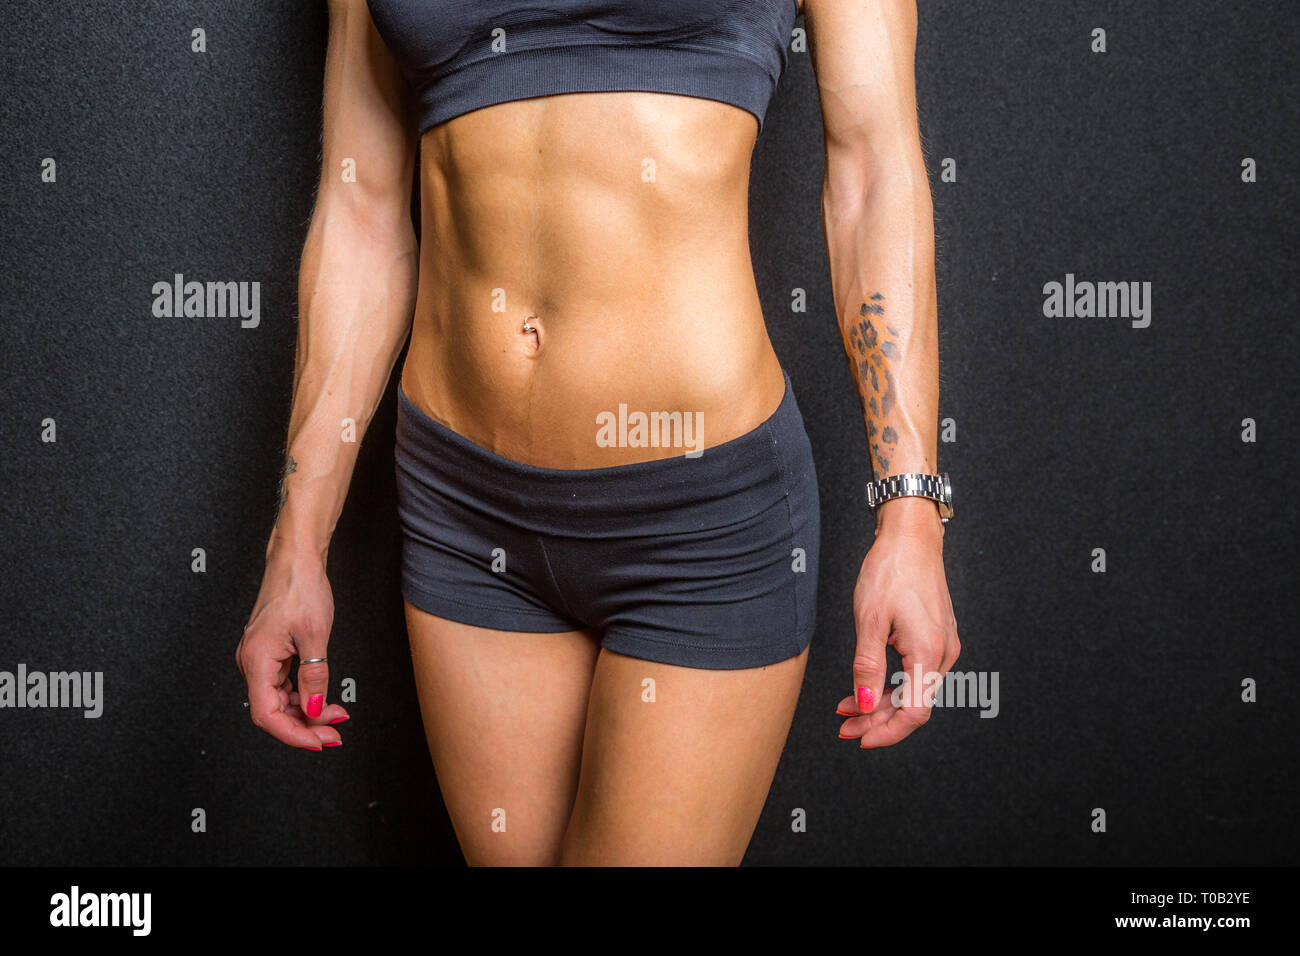 The abdominal muscles on a female fitness model. on black background. Stock Photo